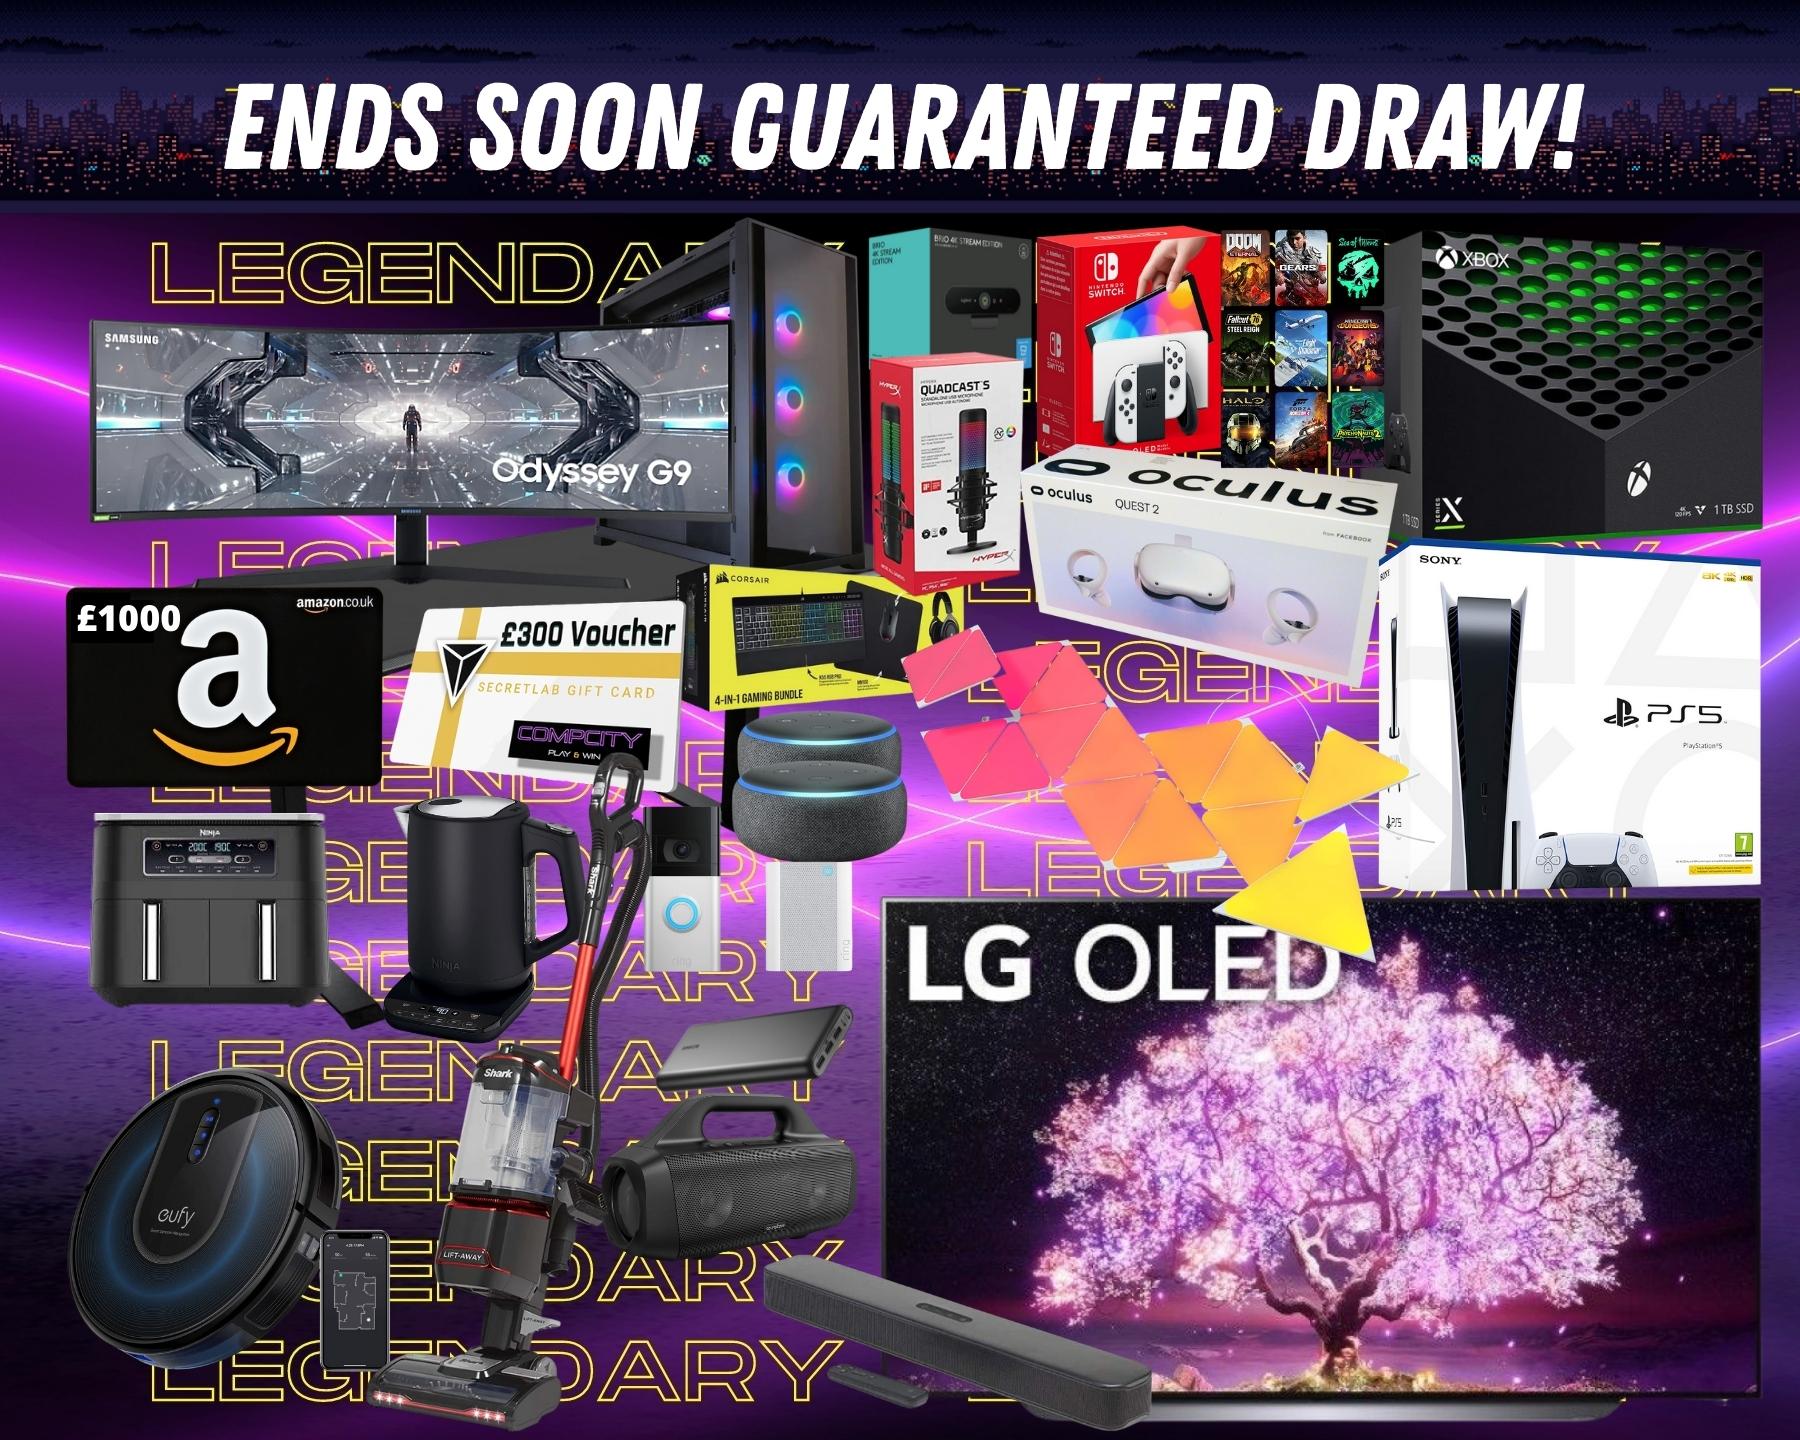 Win this Legendary Tech Bundle with 50 Instant Loots! All the tech you'd ever want for the main prize with awesome Instant Loot to win before the draw!